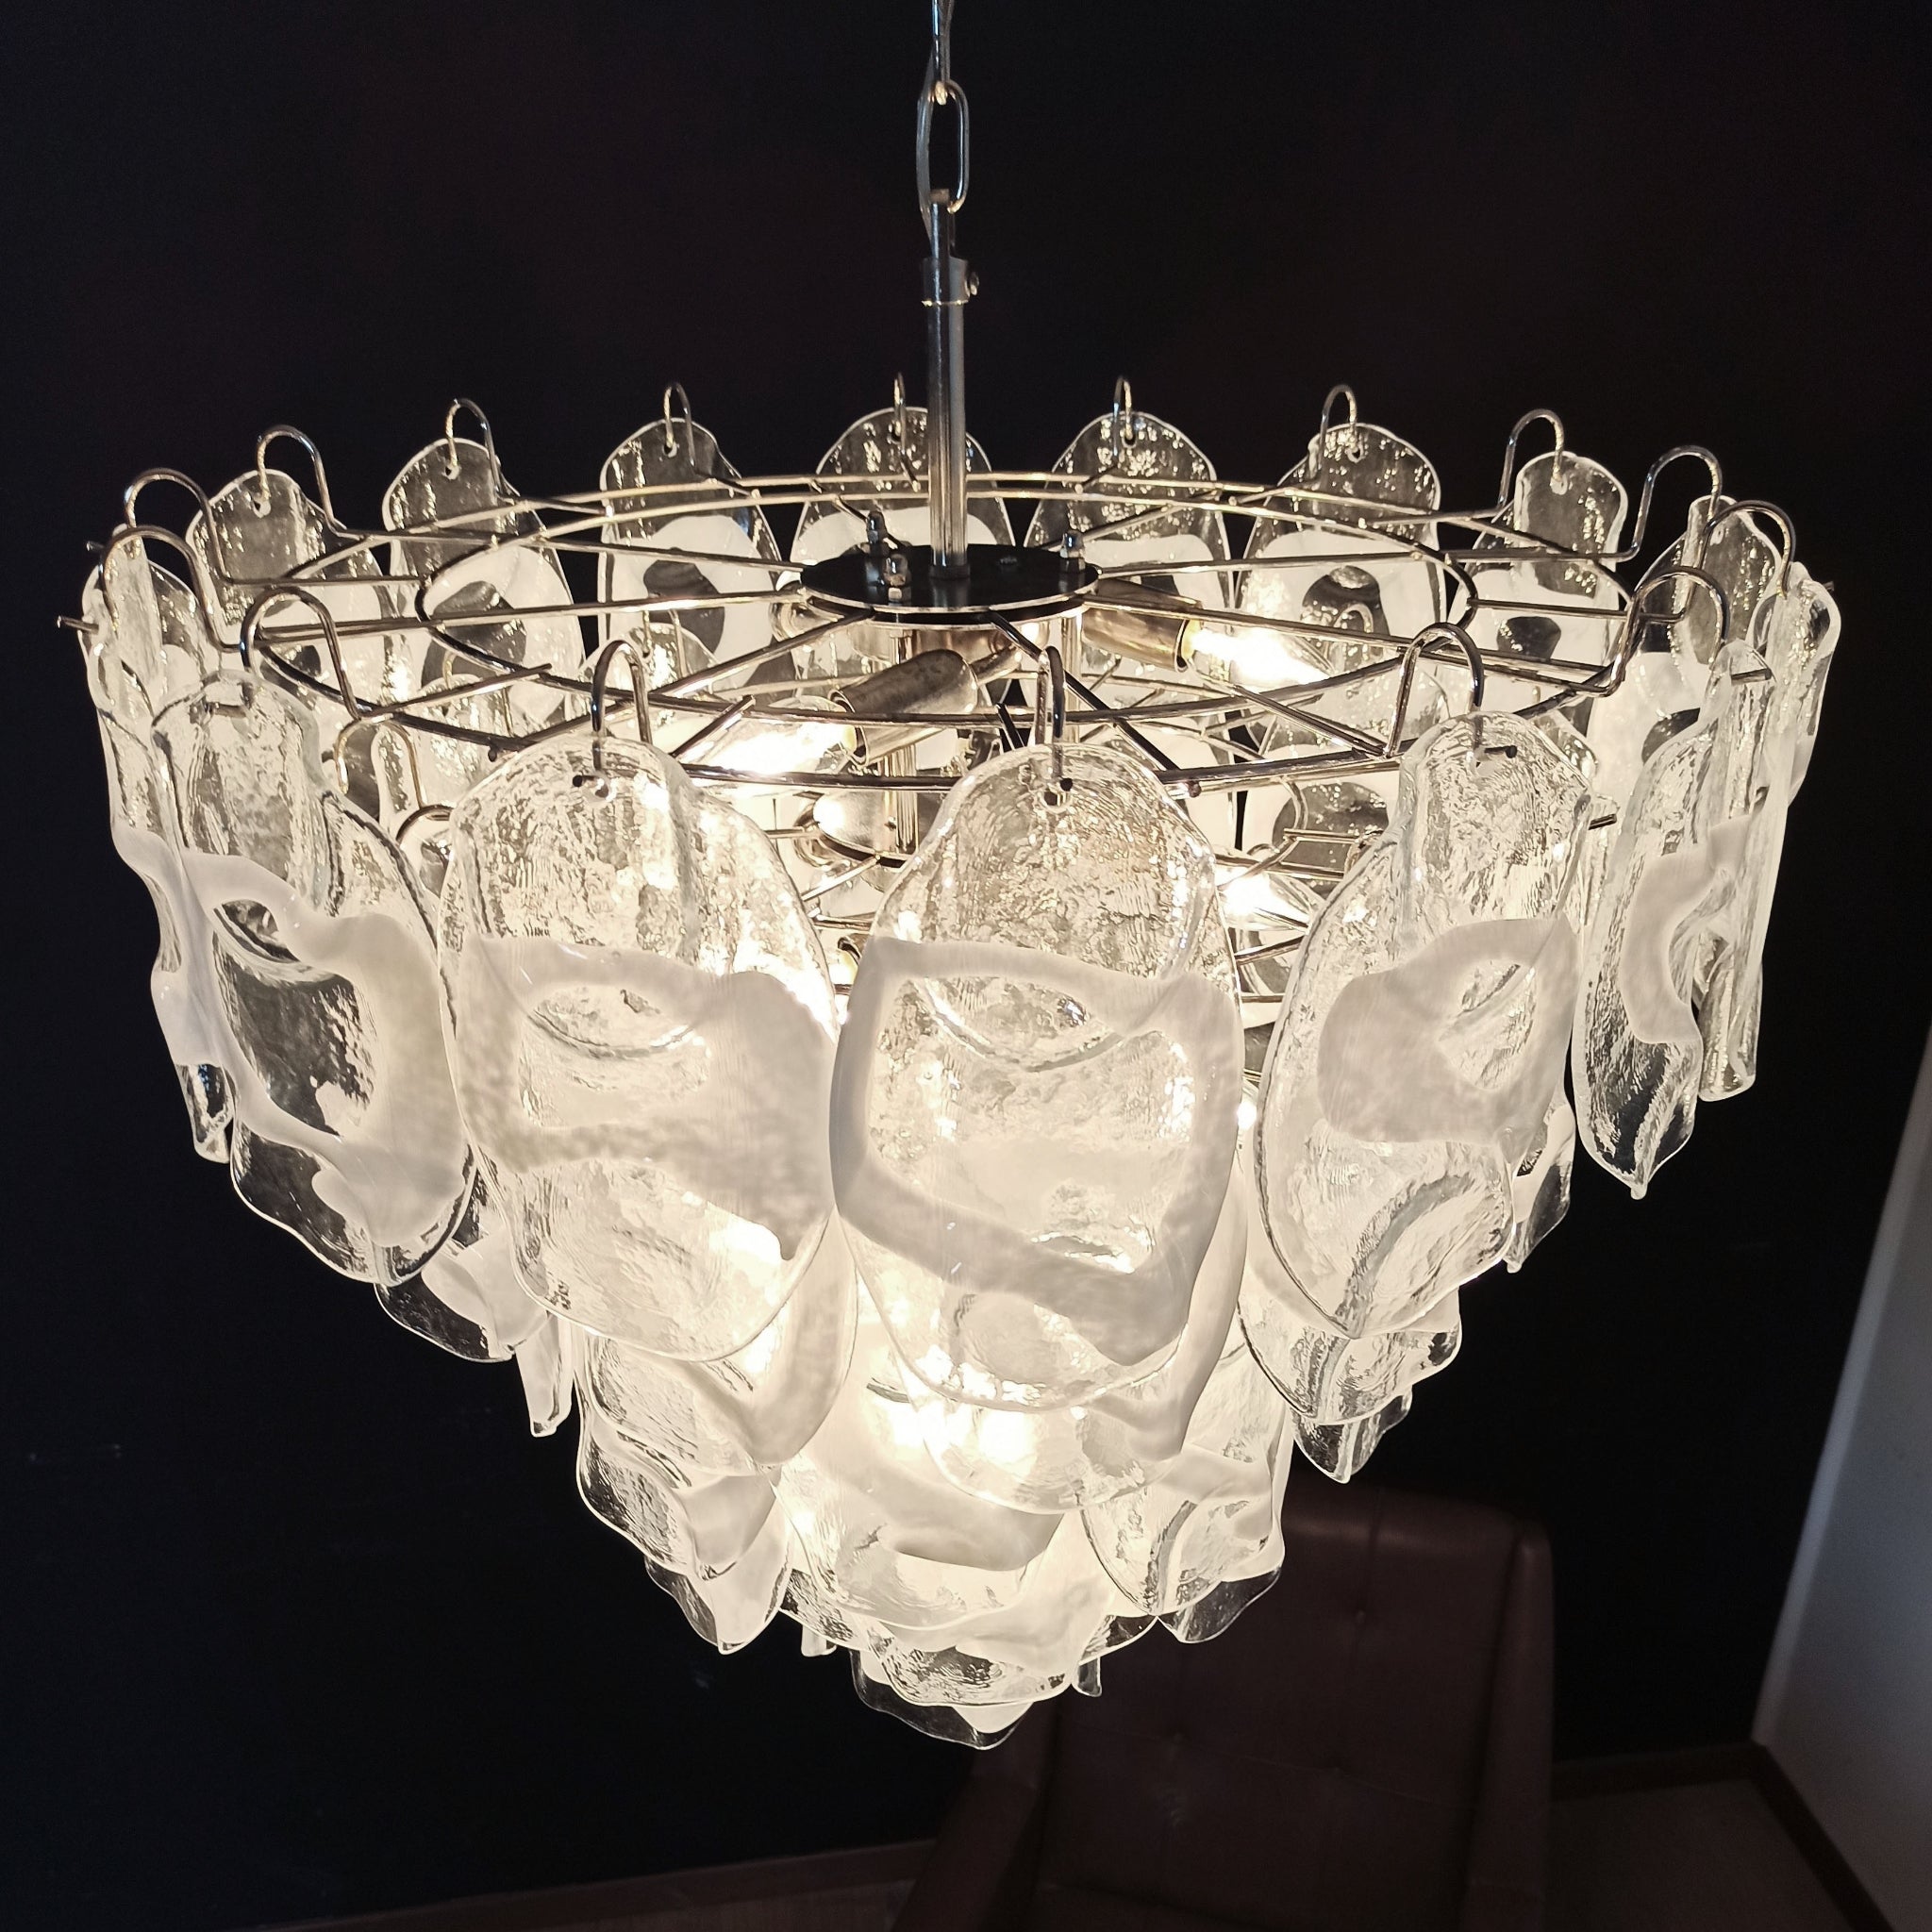 Murano Chandelier lamp by Vistosi with 57 glasses